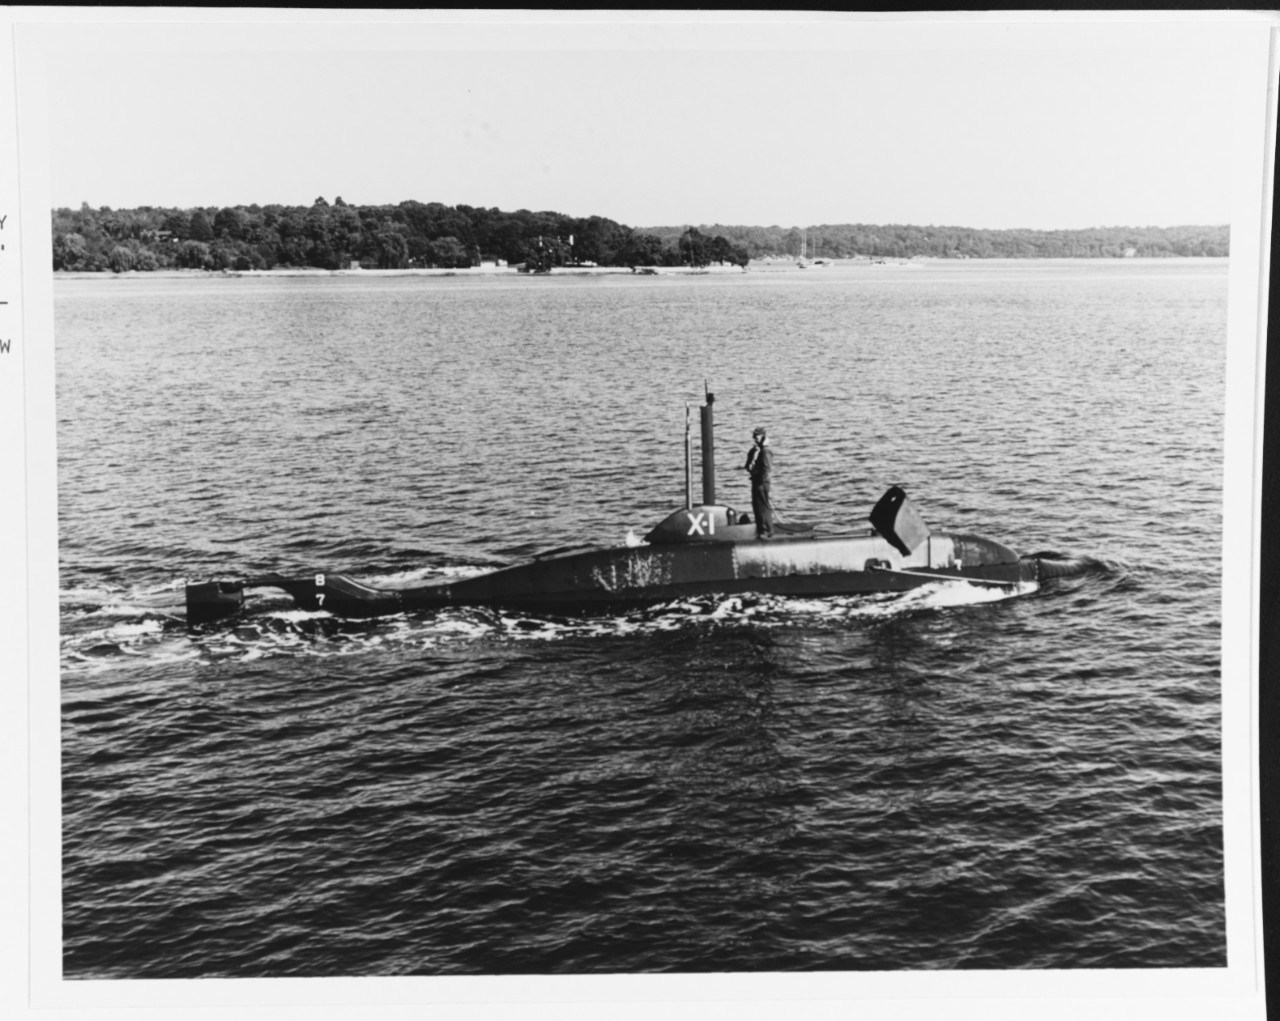 Midget submersible USS X-1 underway on trials in Long Island Sound, 6 October 1955, built by Fairchild Engine and Airplane Corp. Farmingdale Long Island. First Naval vessel designed and constructed by a U.S. aircraft manufacturer. The 25 ton craft is about 50 feet long and has a crew of one officer and four men.